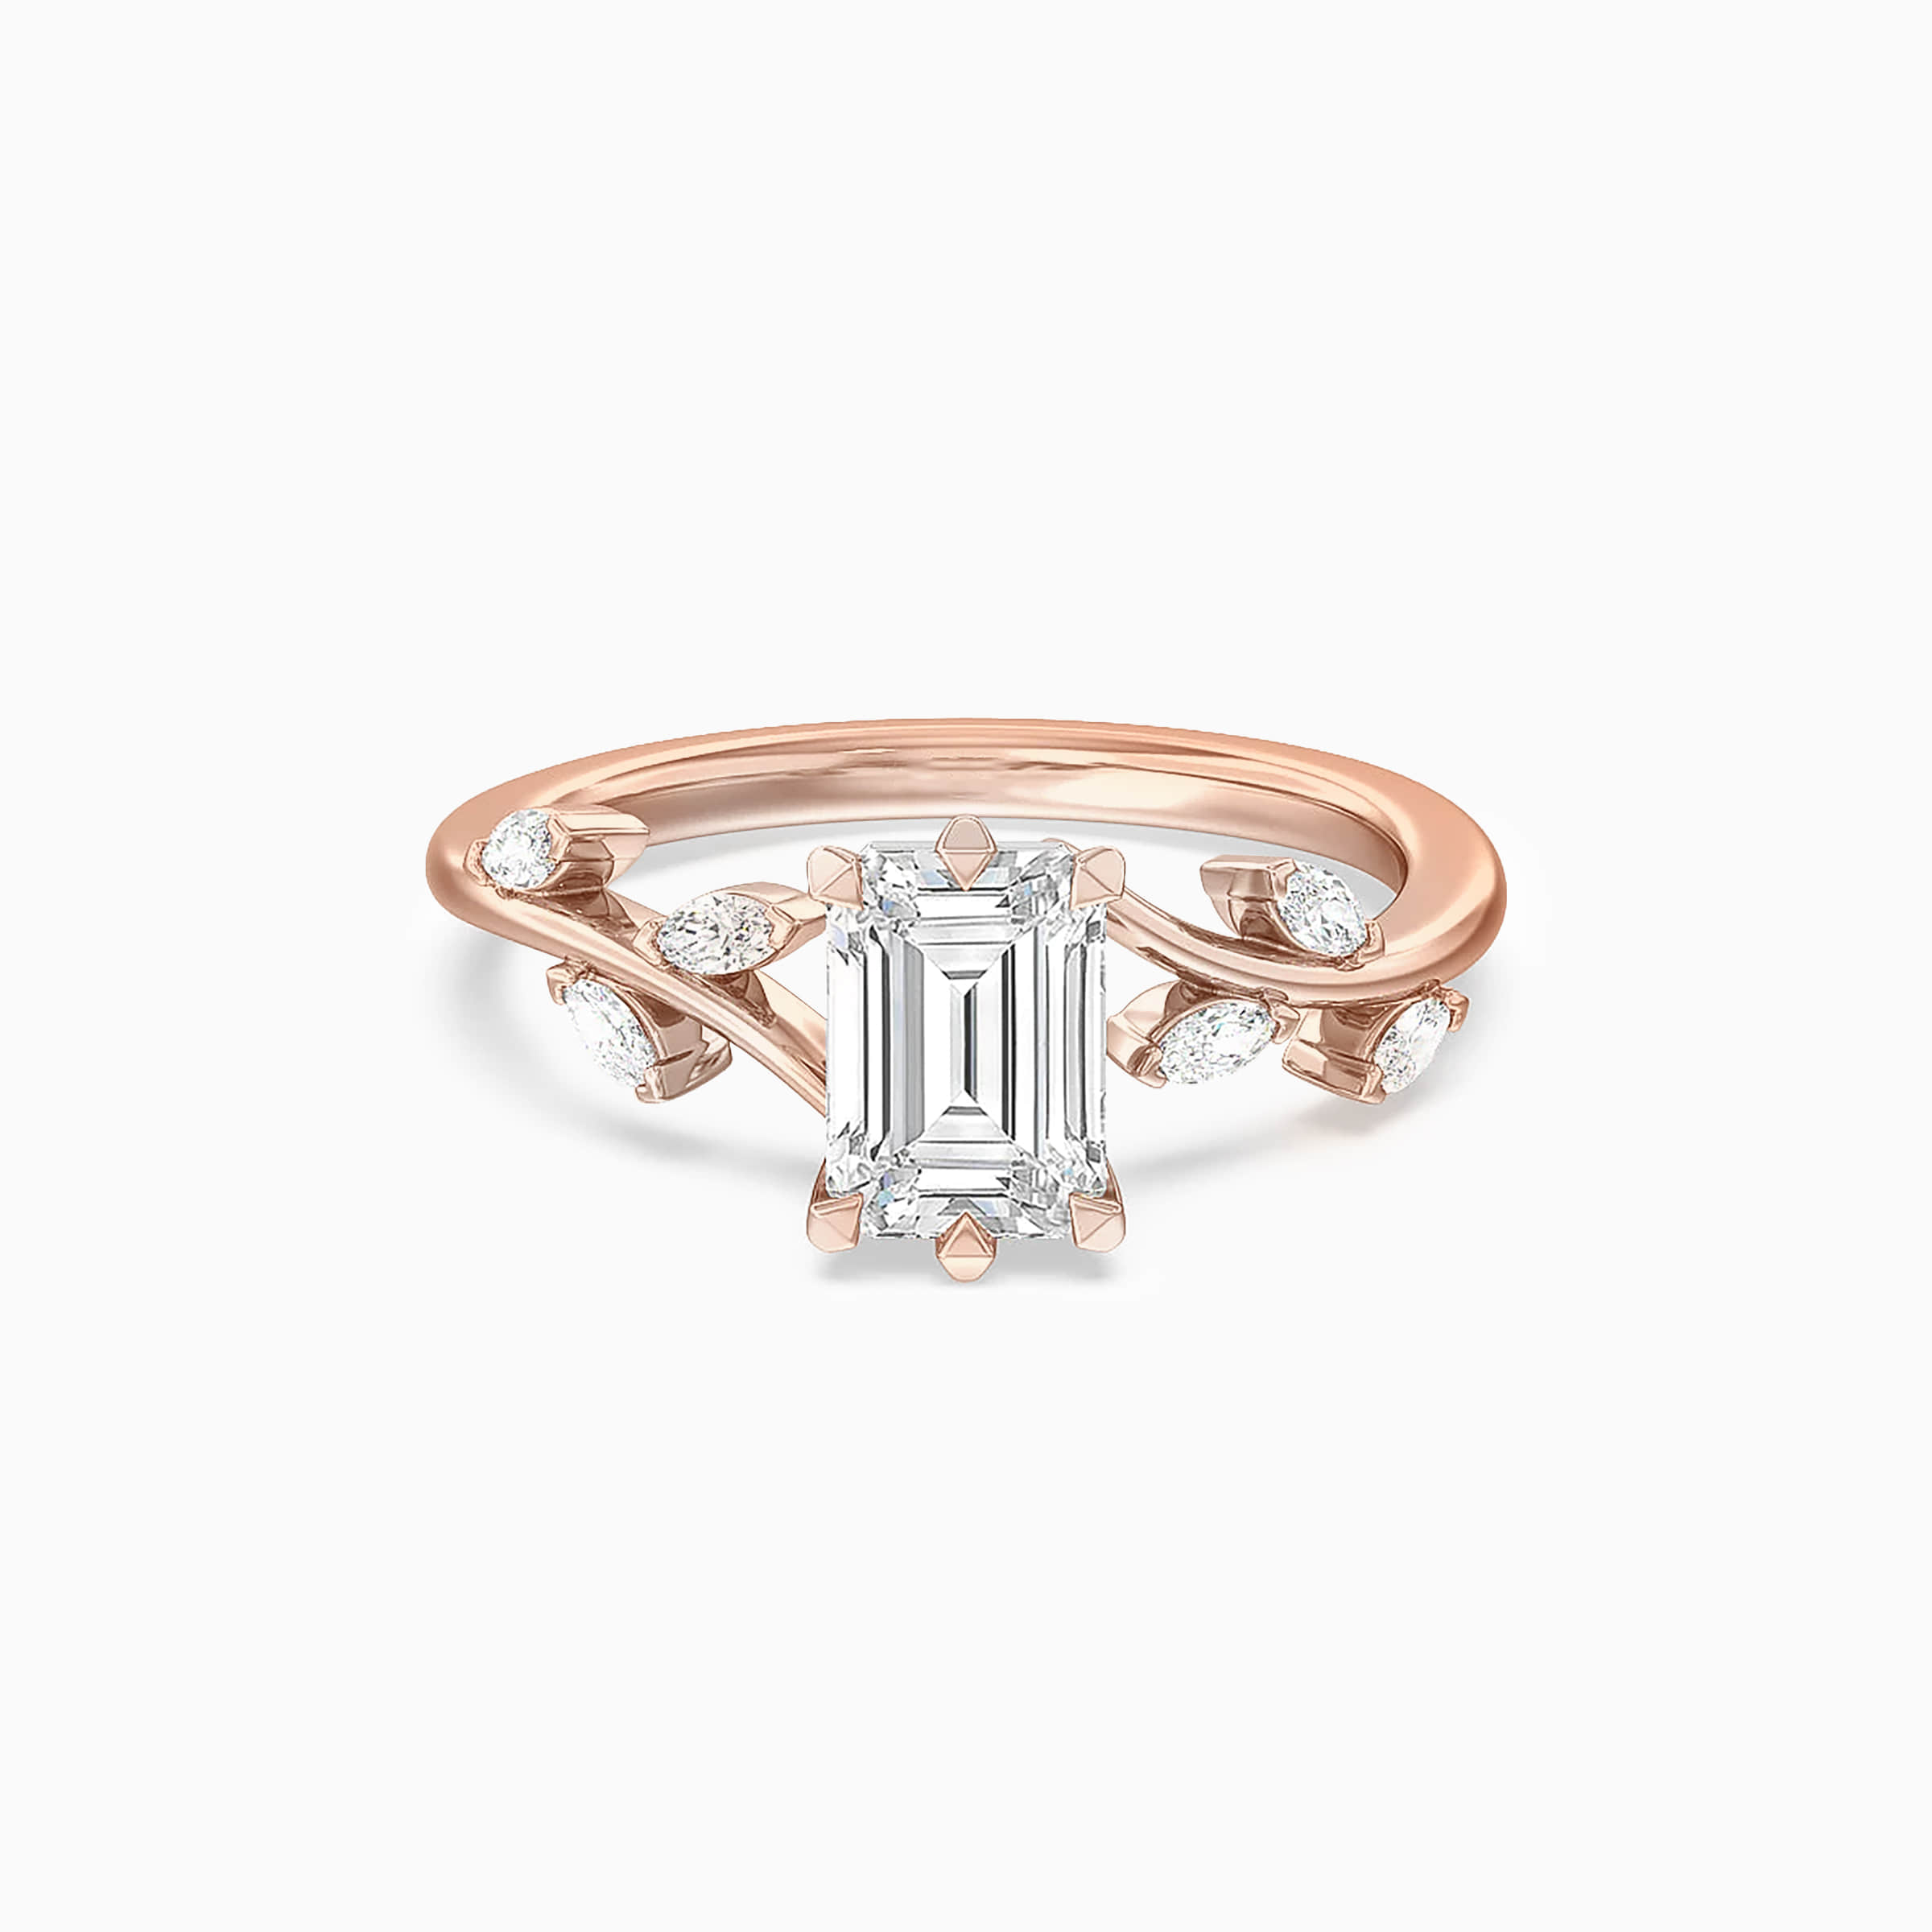 Darry Ring emerald cut vine engagement ring rose gold